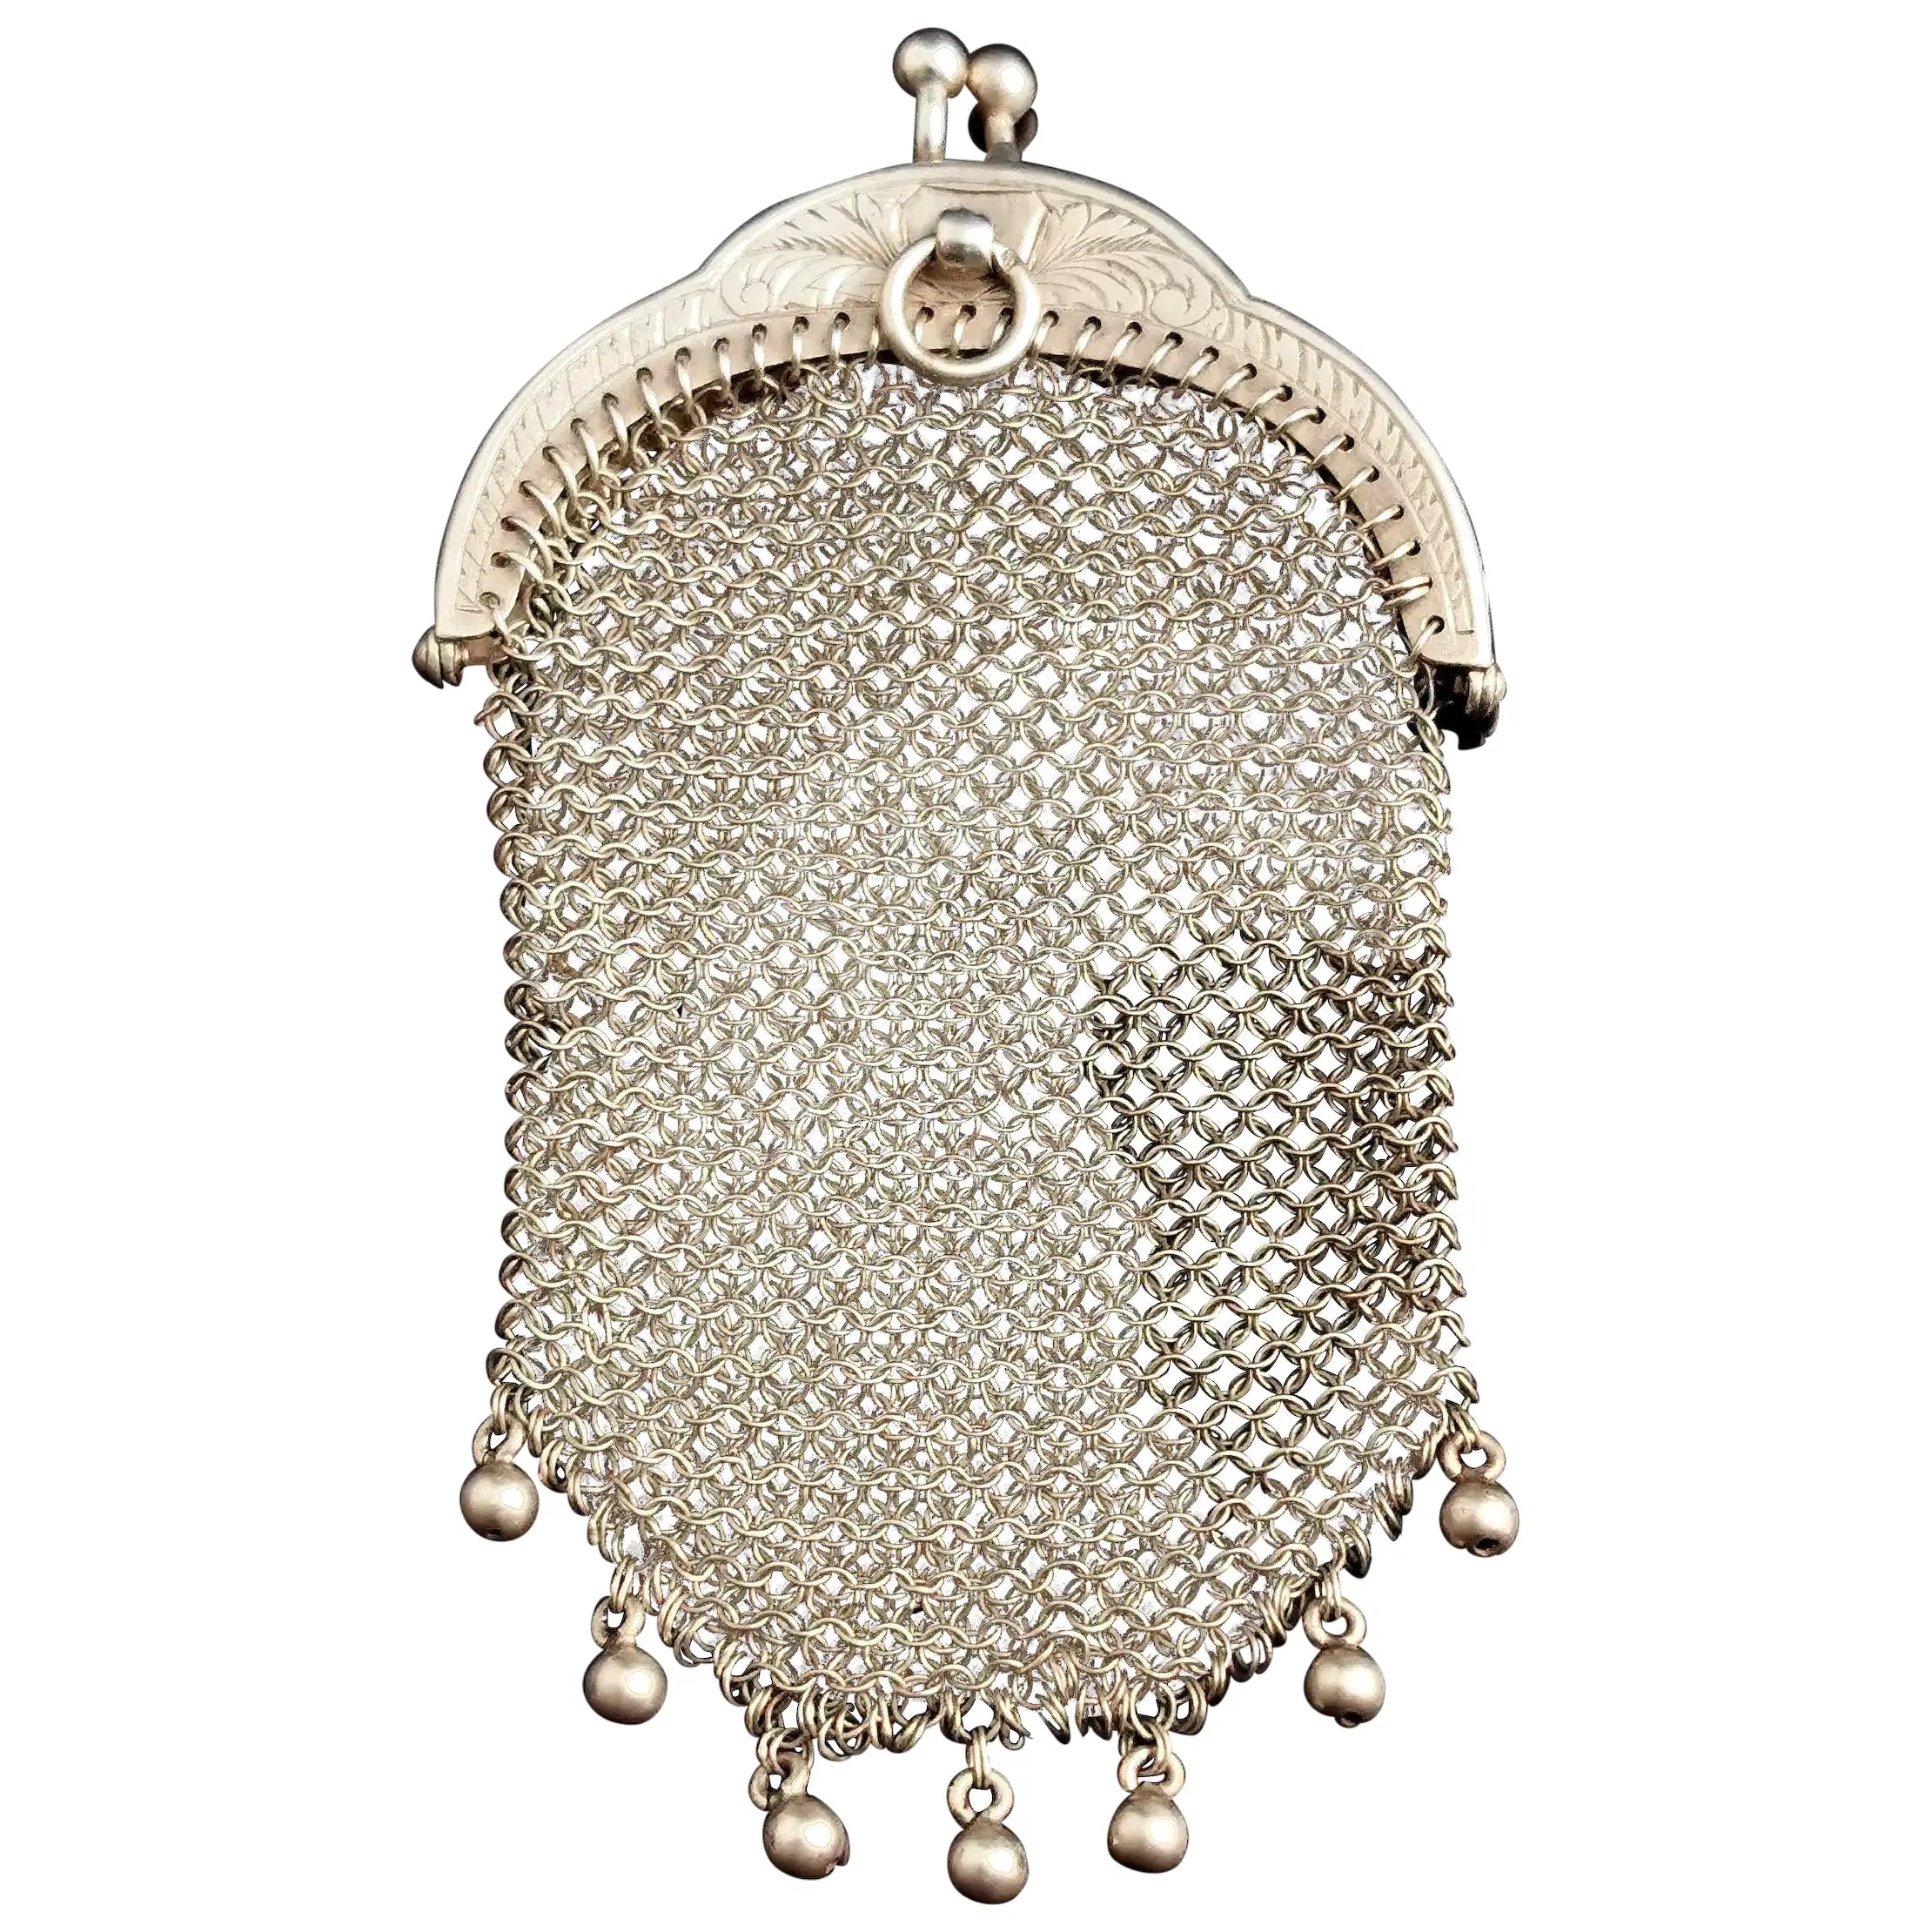 Vintage Antique German Silver Mesh Coin Purse-codding  Bros-heilborn-mass-wedding-chain Mail Purse-leather Lined-art  Deco-collectible - Etsy Israel